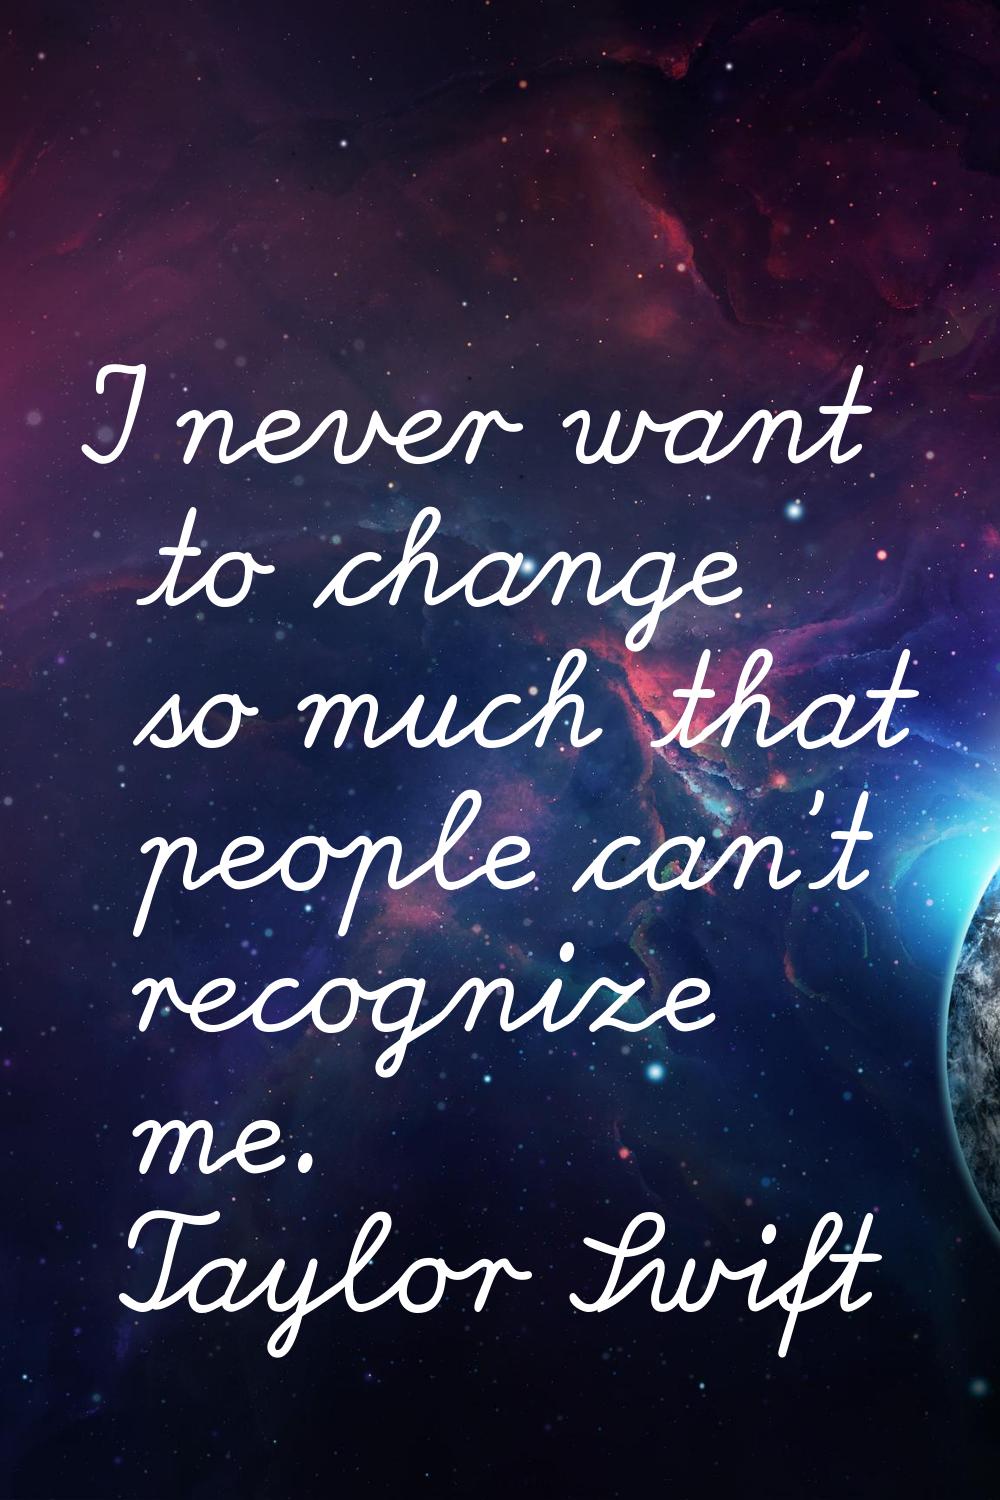 I never want to change so much that people can't recognize me.